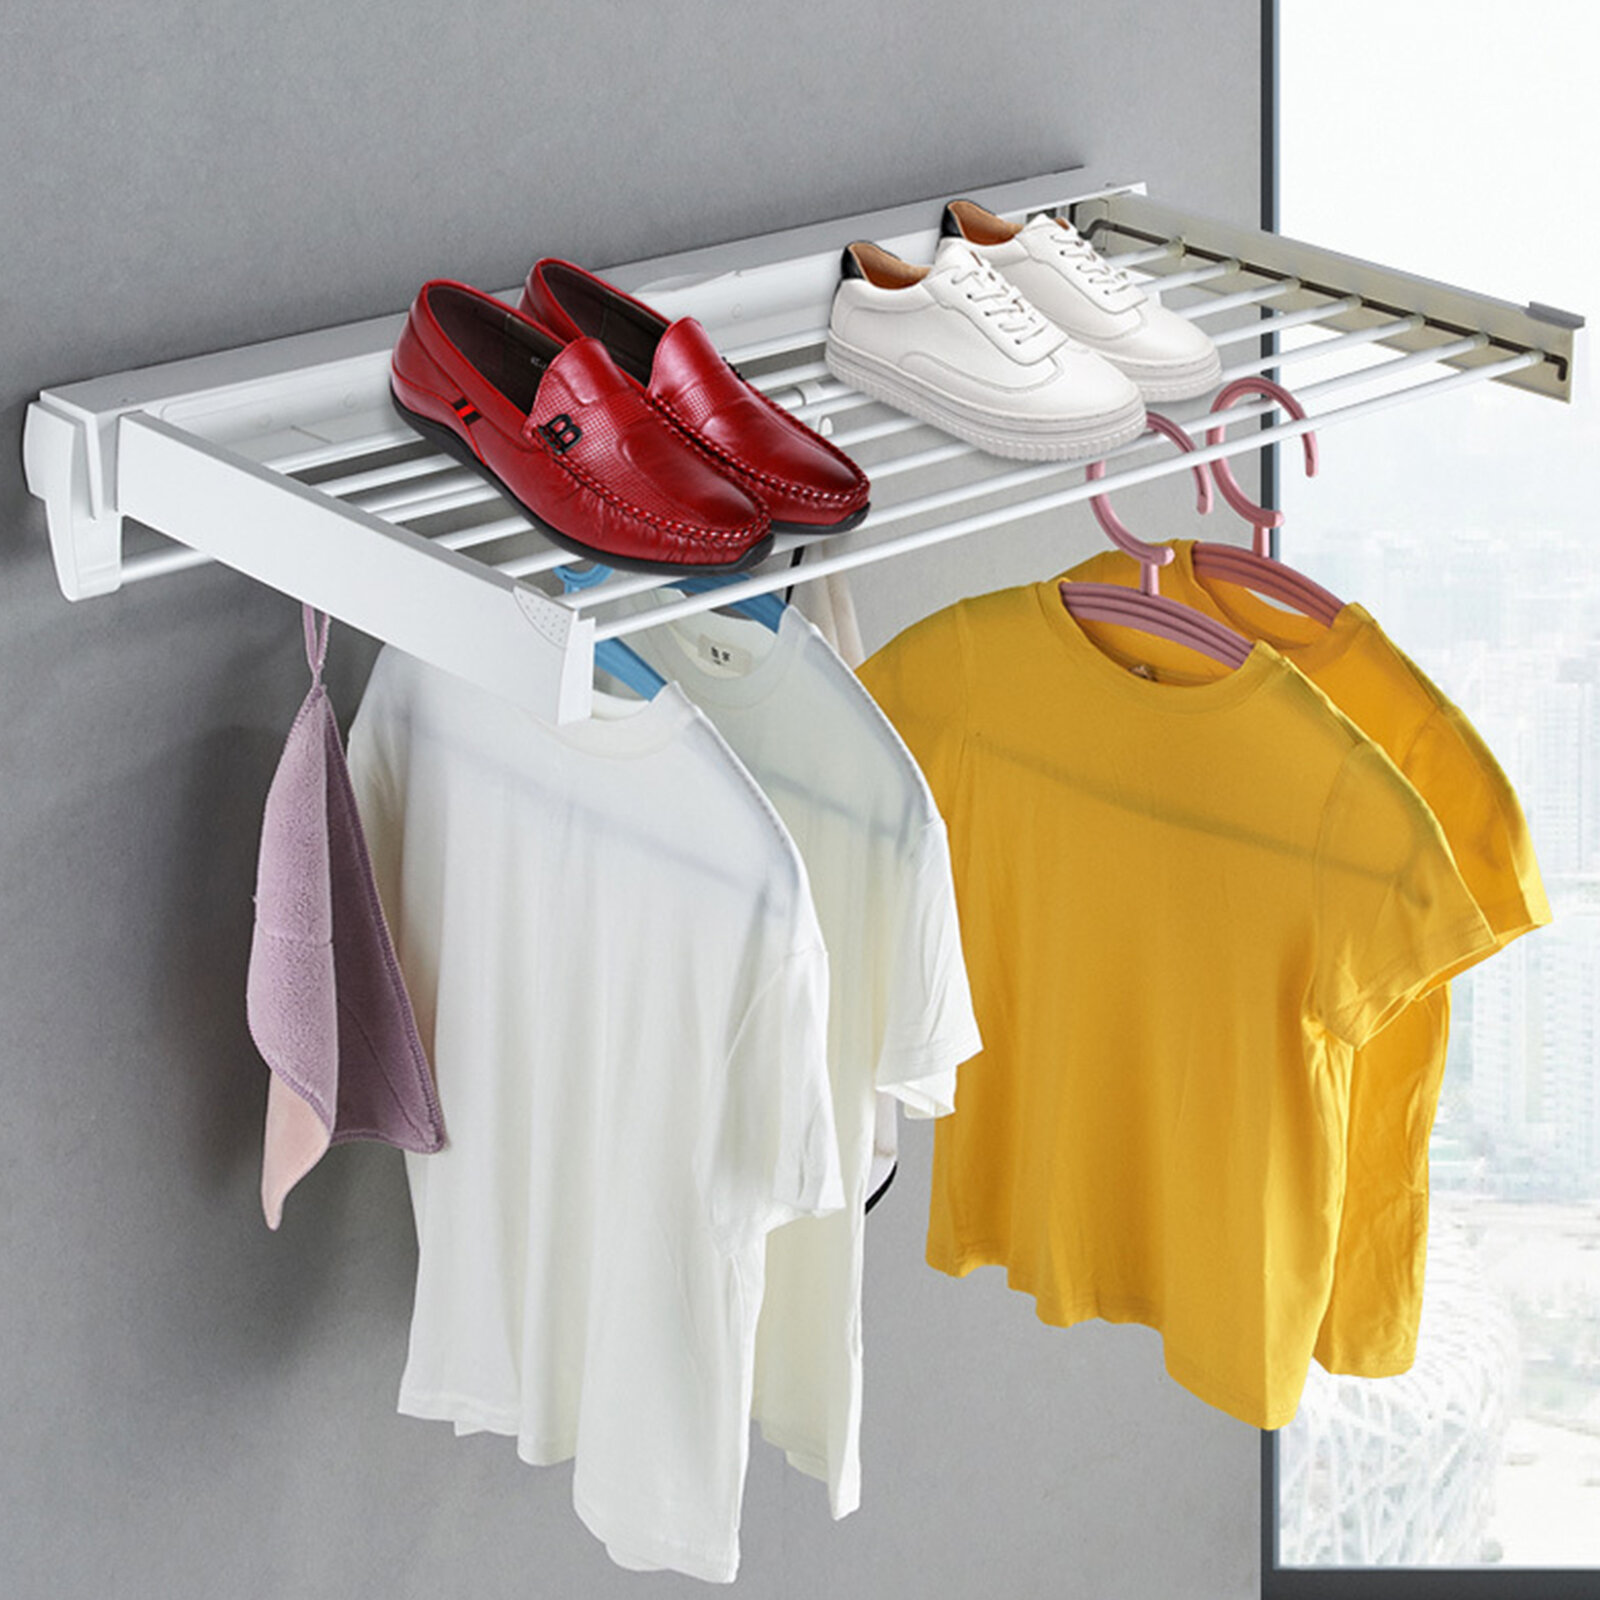 Metal Wall Mount Expandable Retractable Clothes Air Drying Rack Garments  for Laundry Room, Bathroom, Utility Area